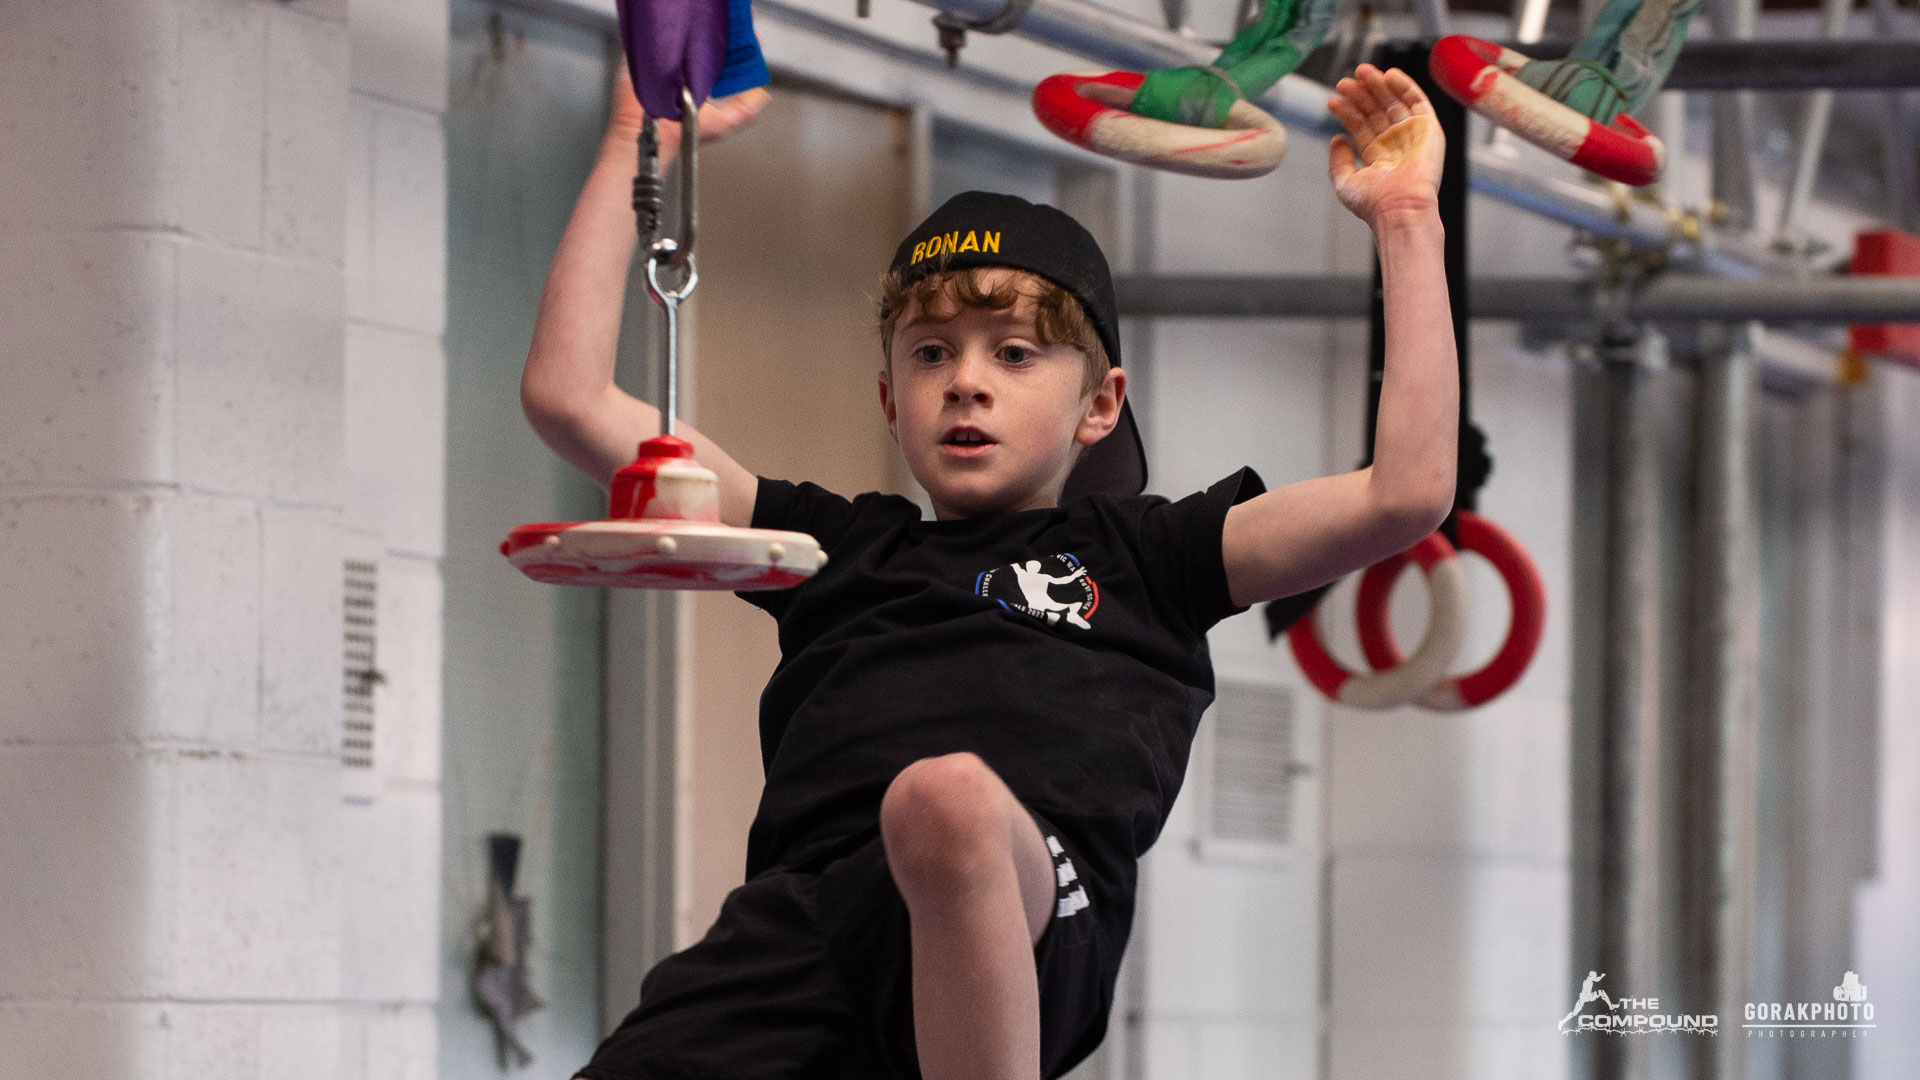 You are currently viewing Kids Ninja Warrior Competition, The Compound, Seaford